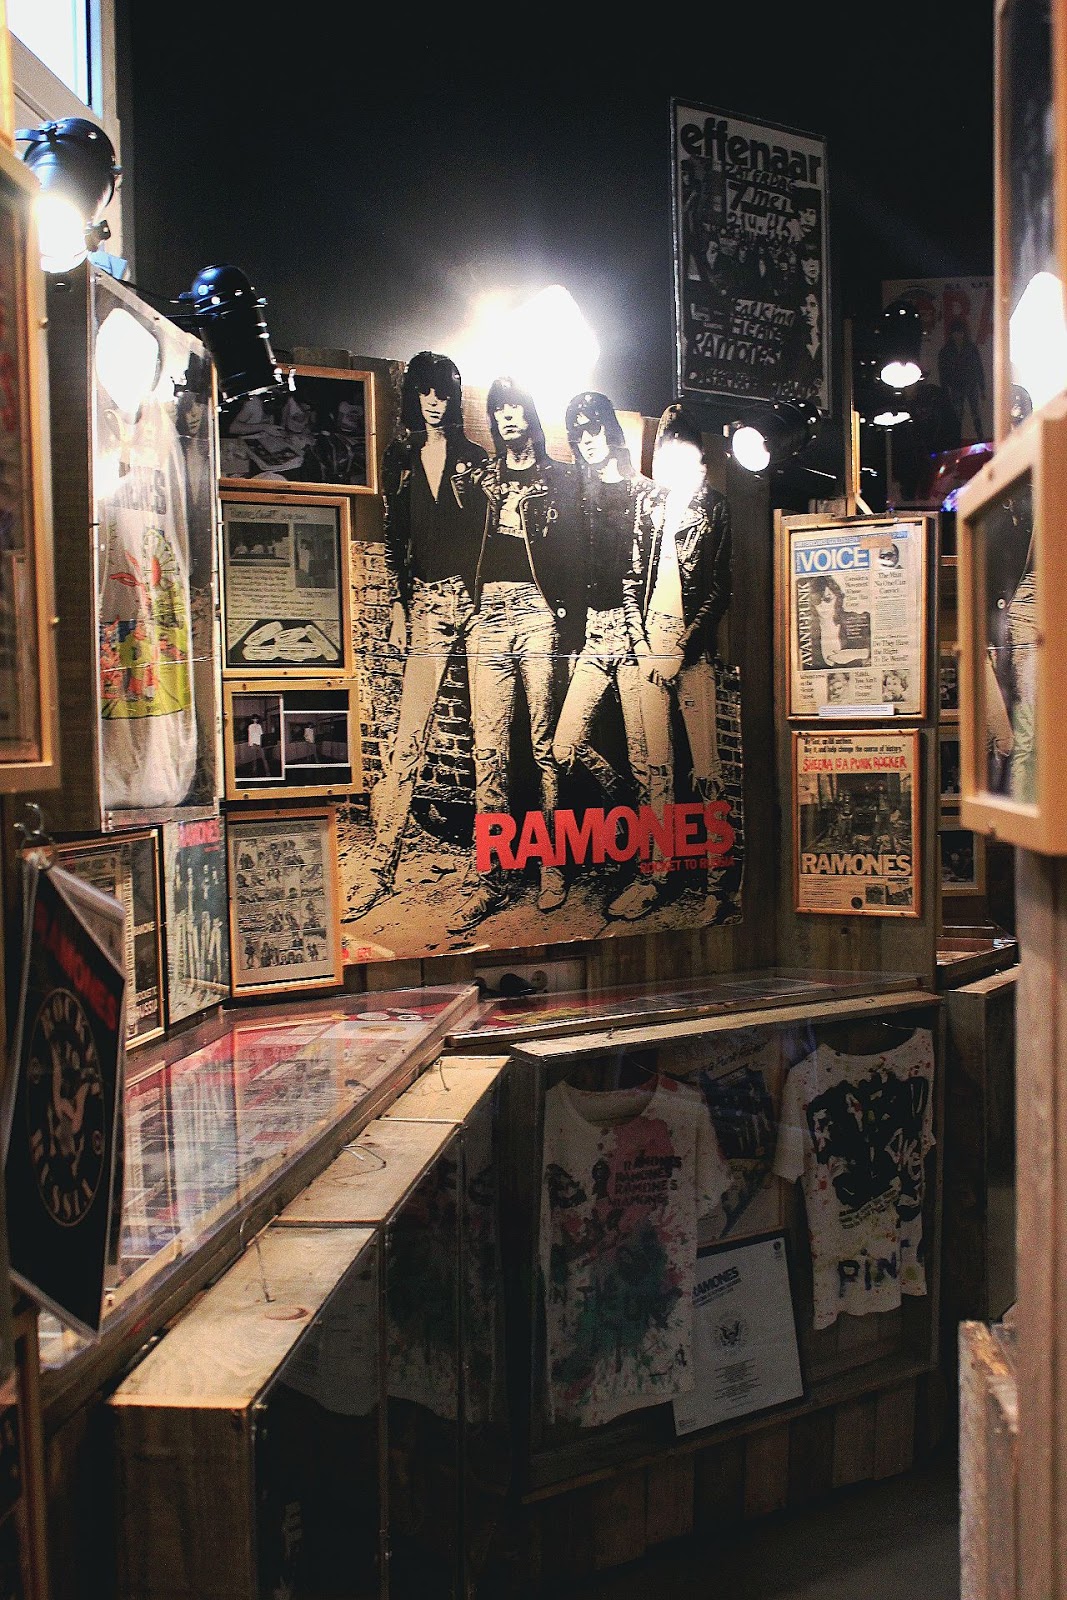 Posters & vintage tees cover the museum's walls